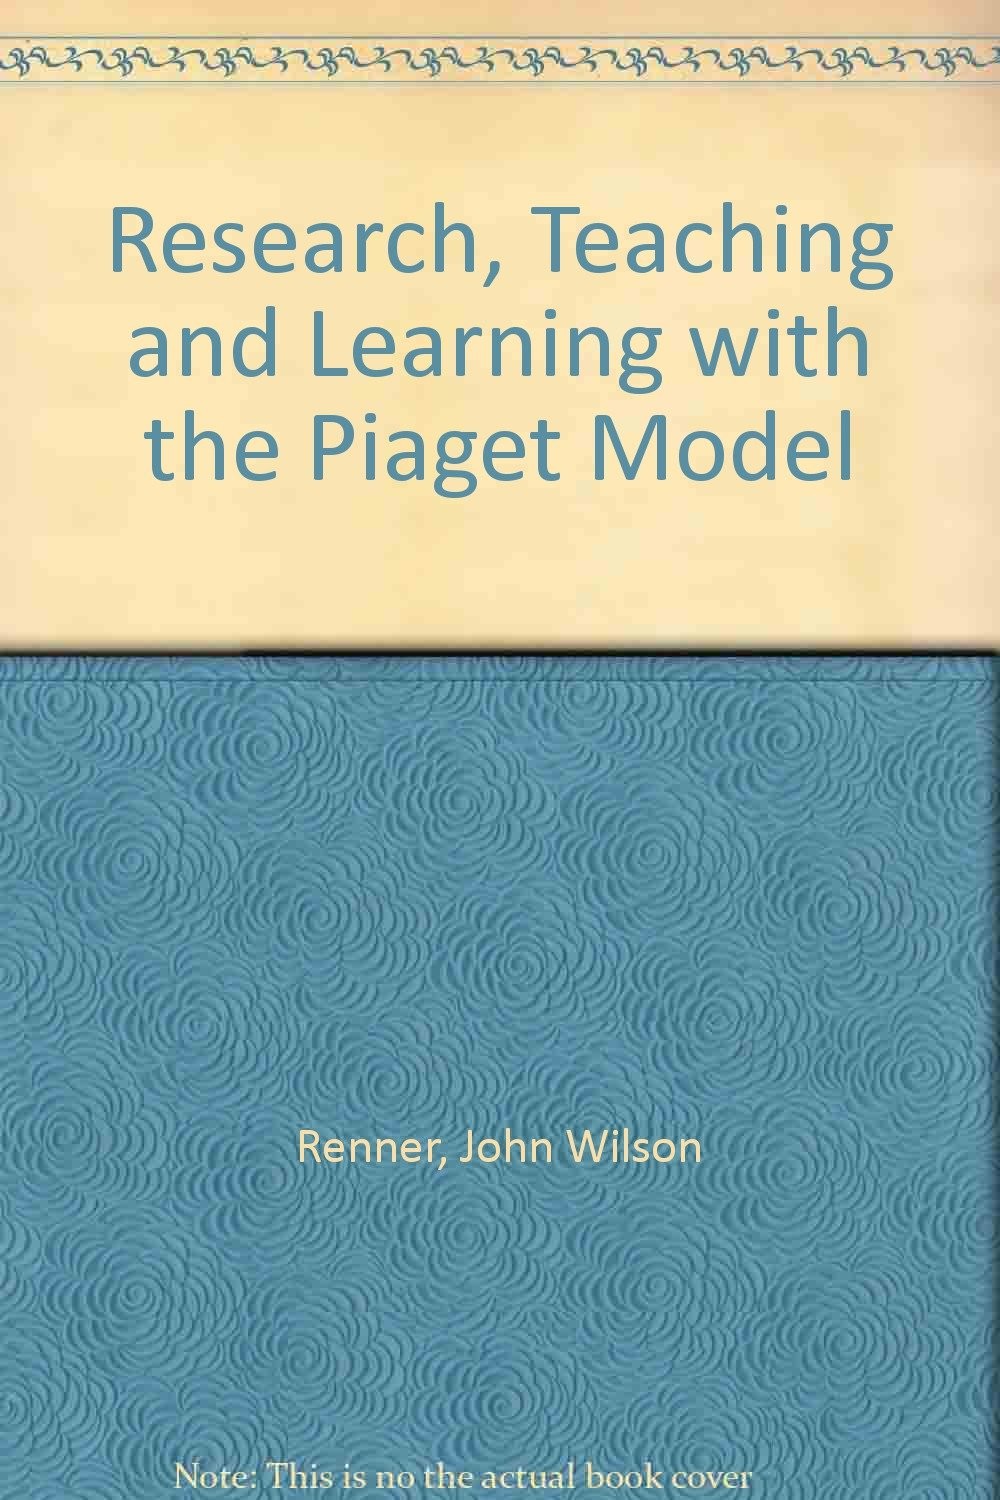 Research, Teaching, and Learning With the Piaget Model